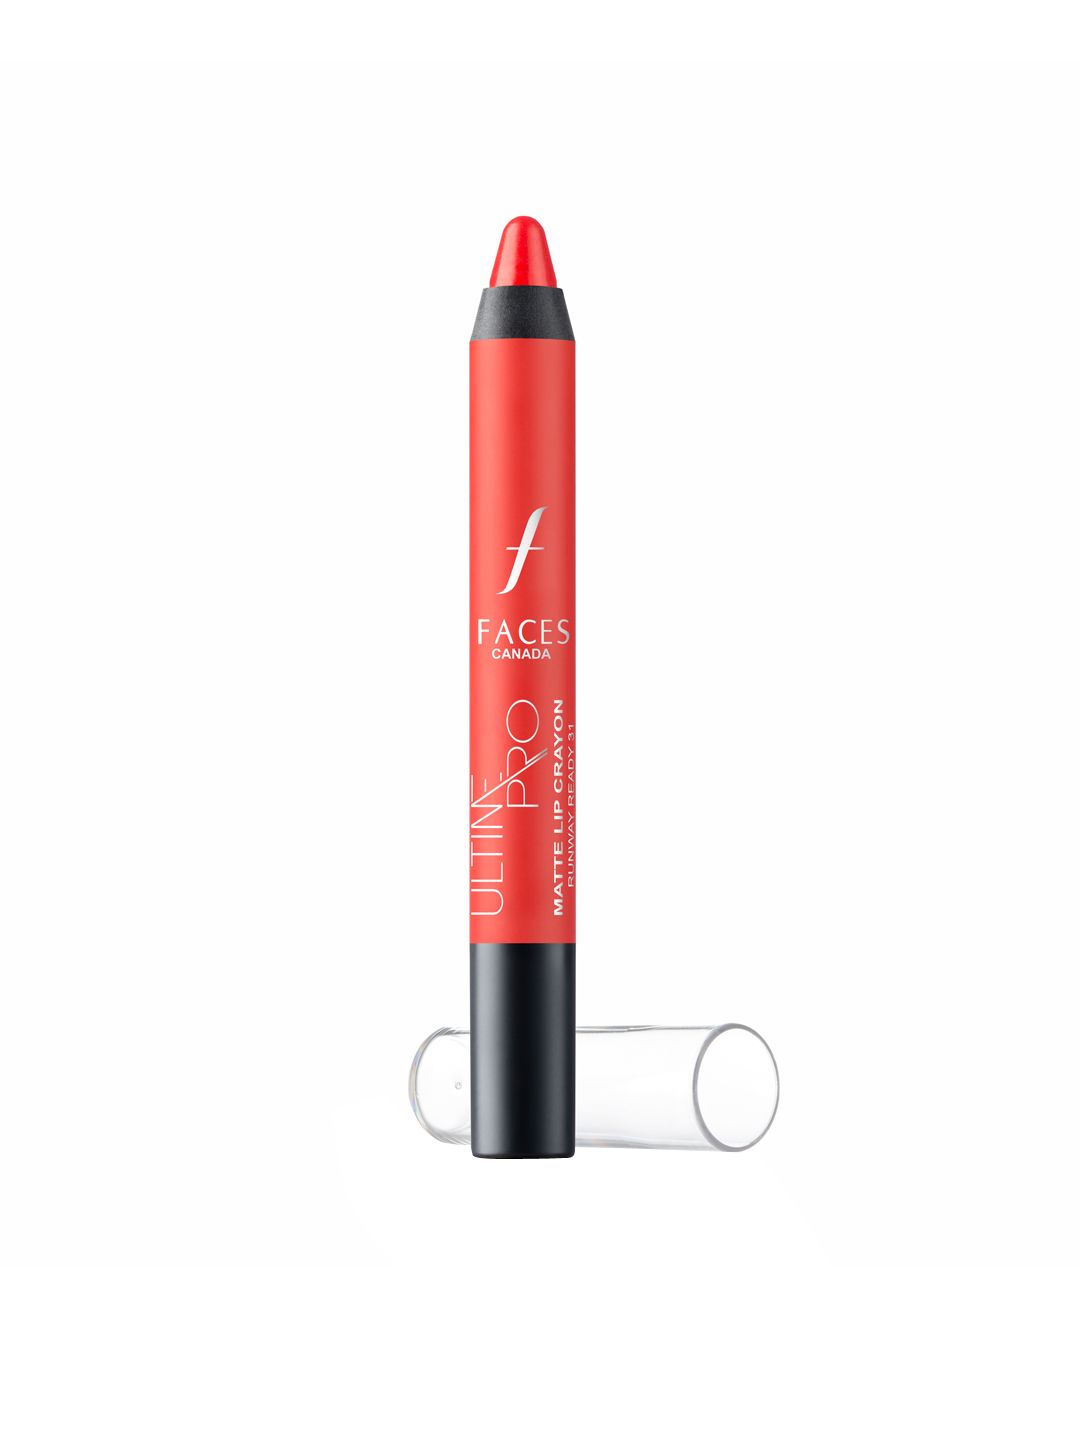 FACES CANADA Ultime Pro 31 Runway Ready Matte Lip Crayon With Free Sharpener  2.8 g Price in India